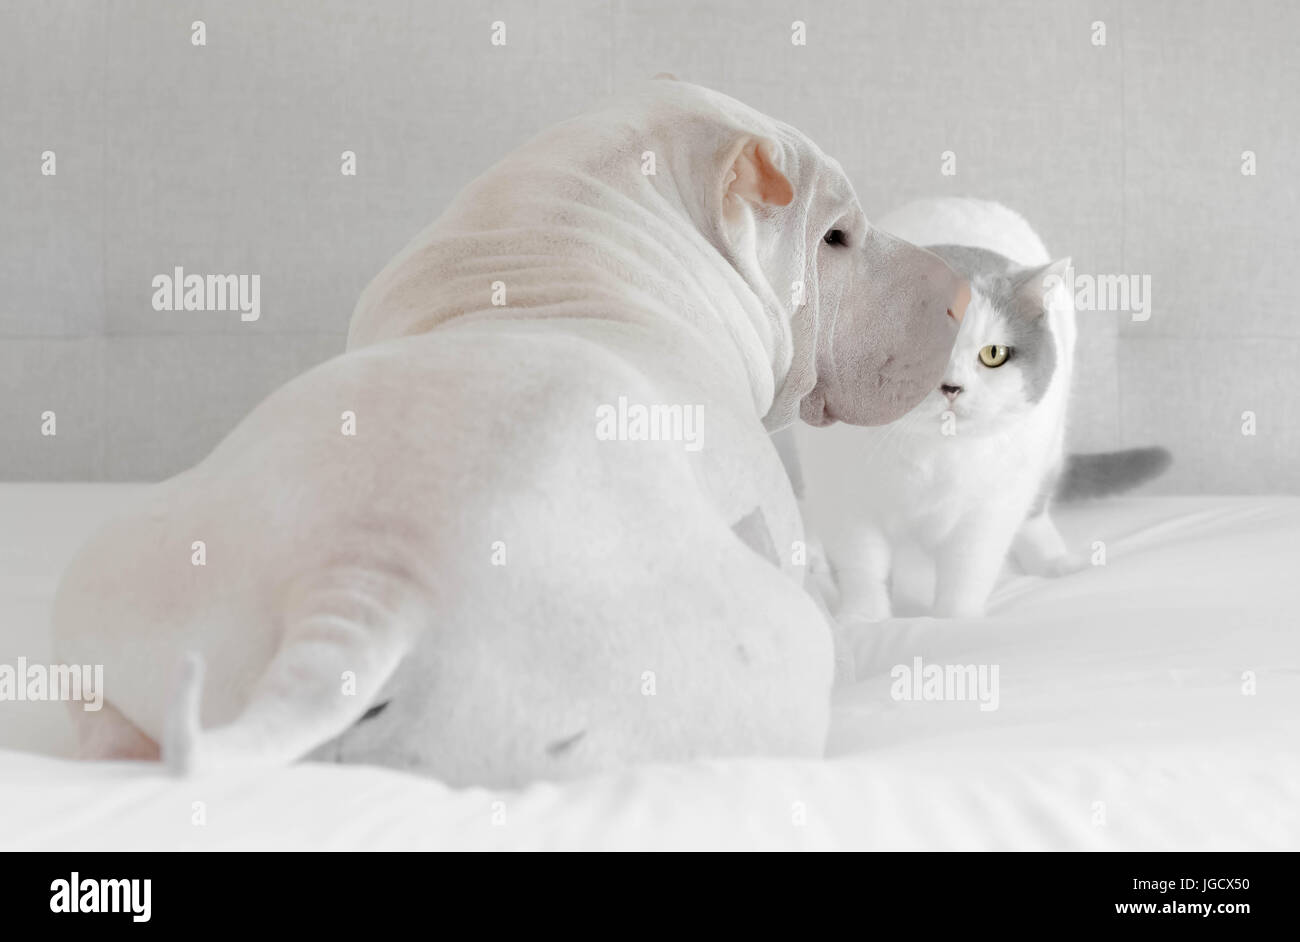 British shorthair cat and shar pei dog sitting on a bed Stock Photo